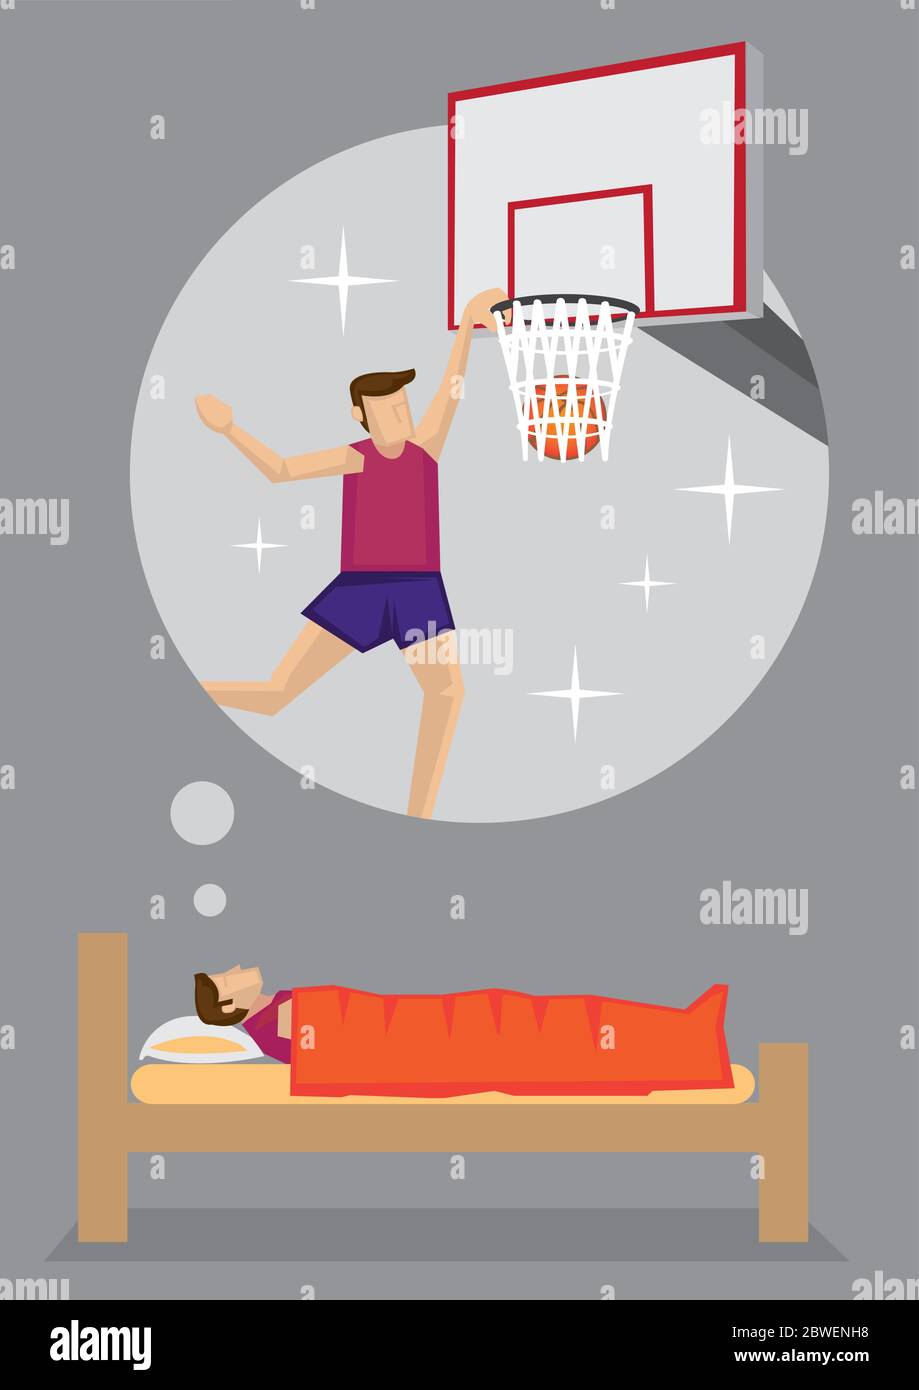 Young man dreaming of becoming a professional basketball player. Cartoon vector illustration on dream and aspiration concept isolated on grey backgrou Stock Vector